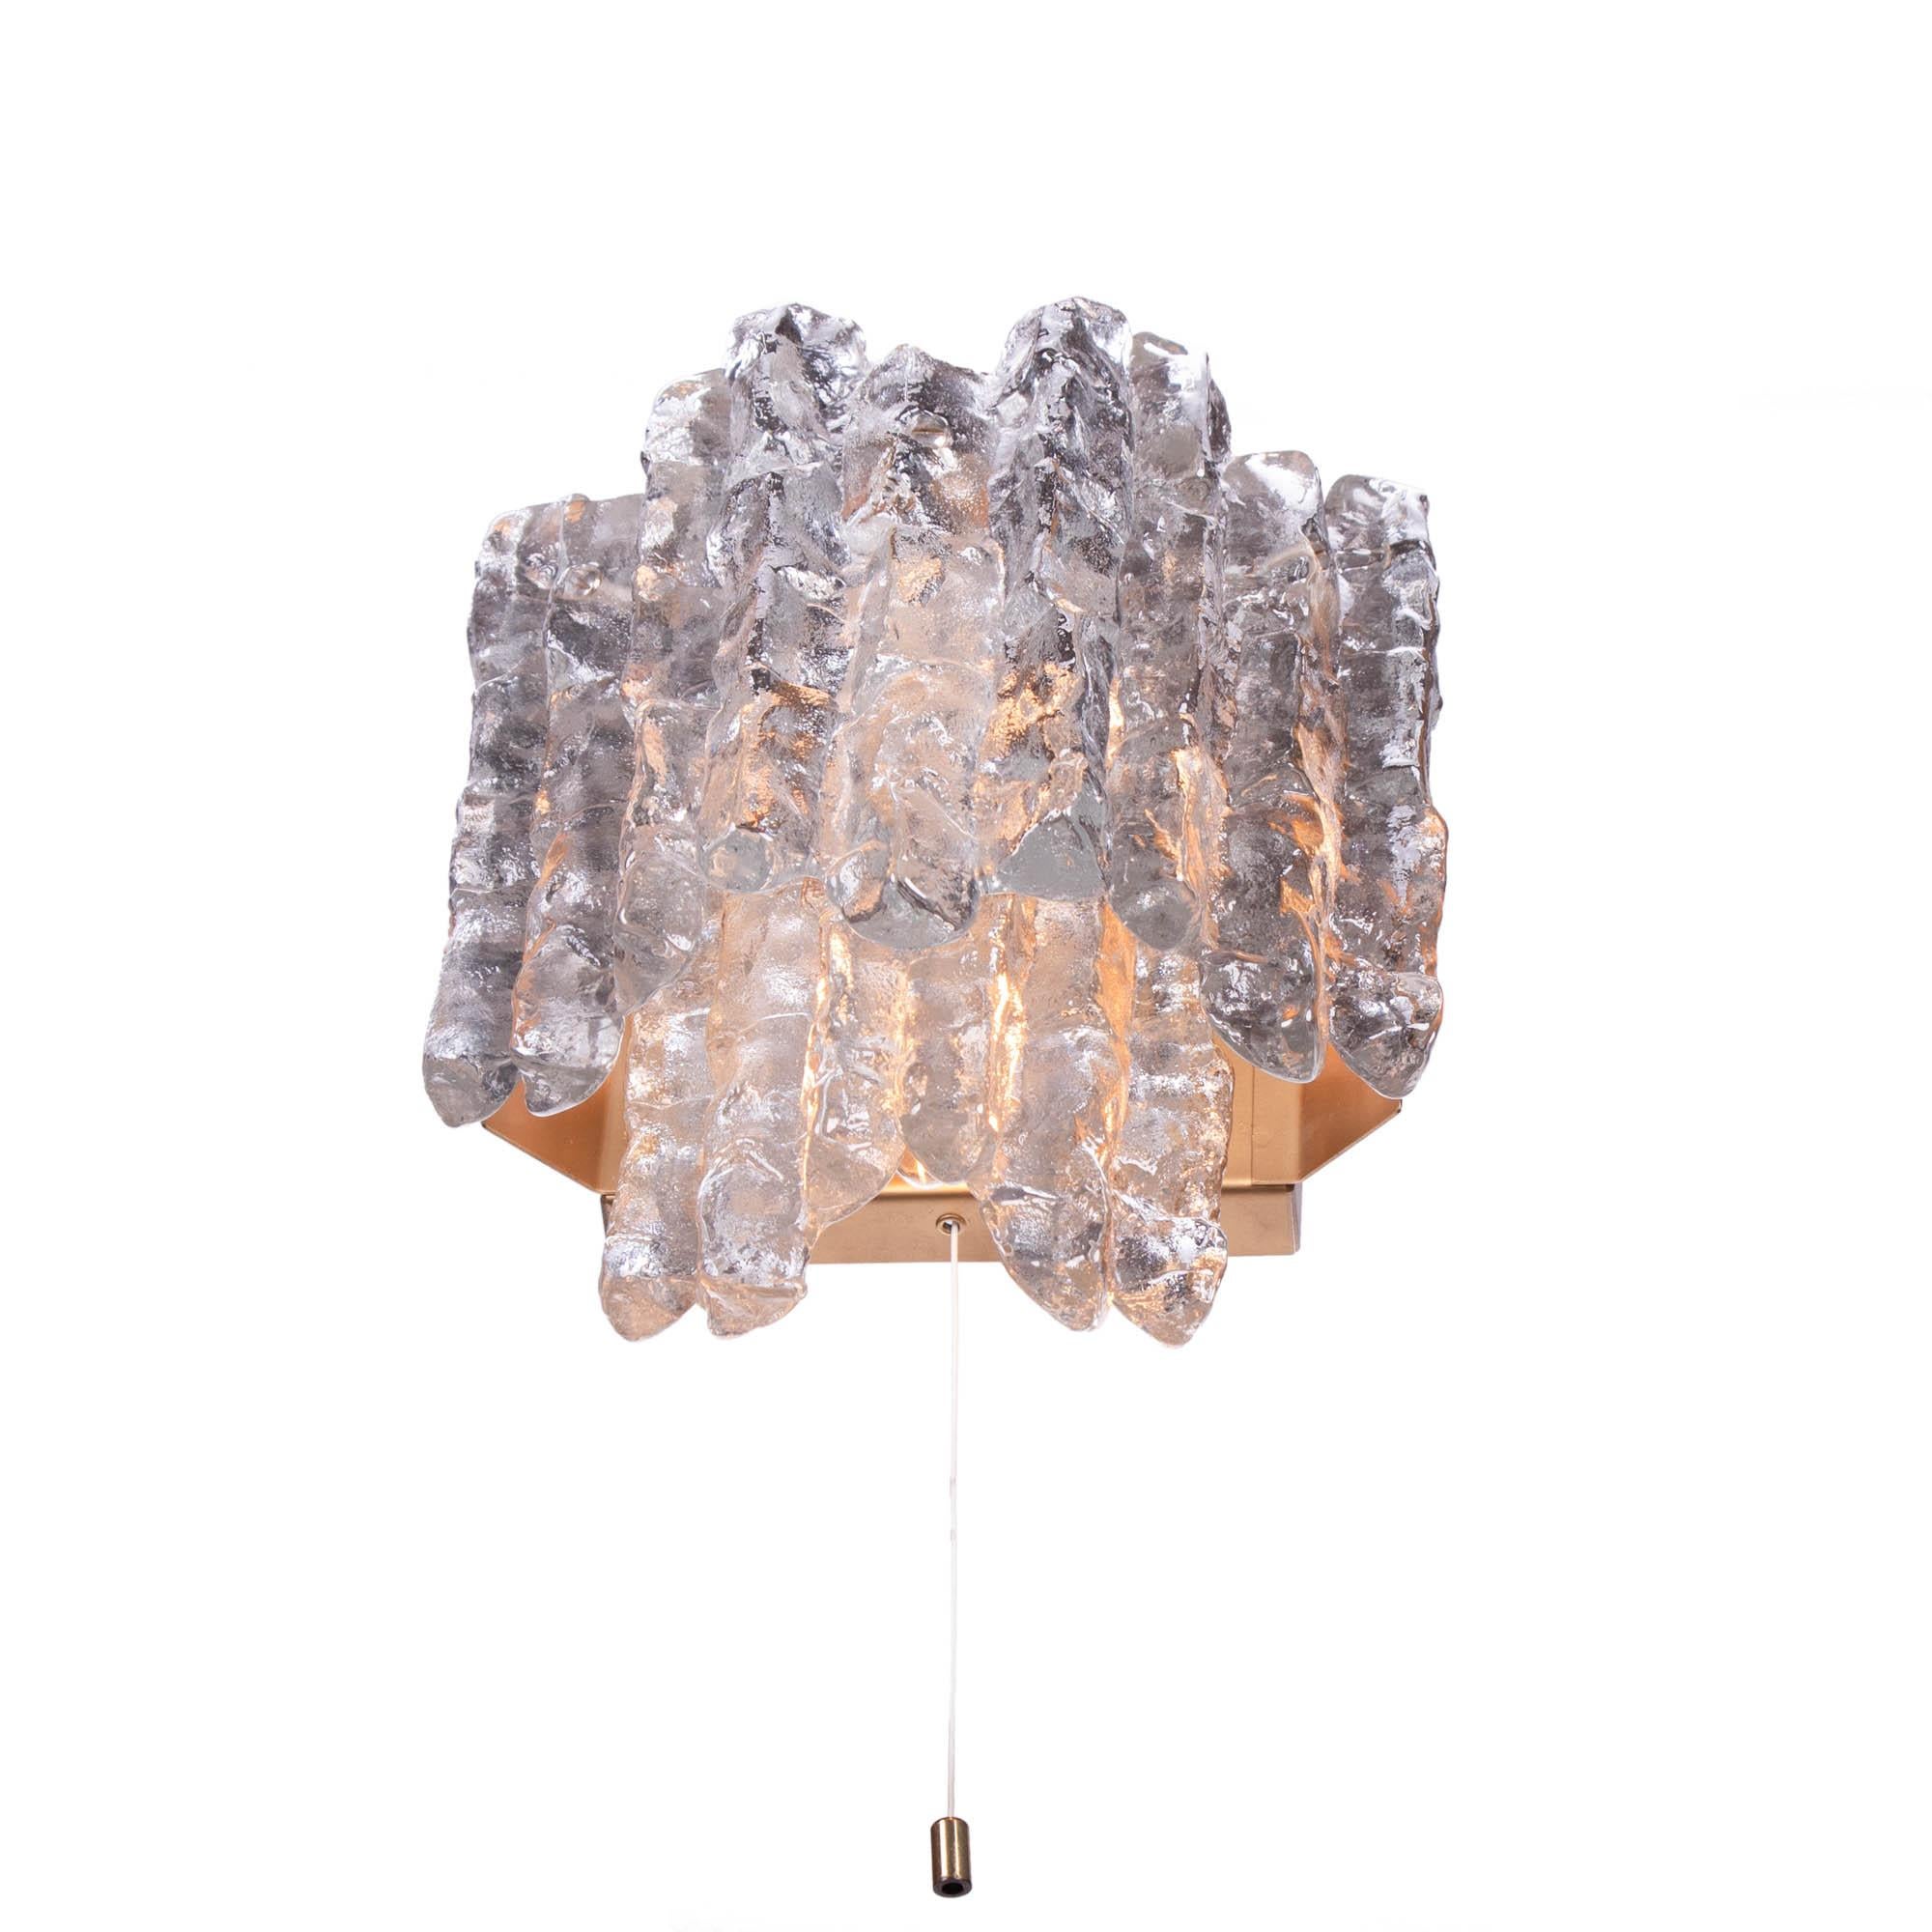 Elegant wall sconce with handblown murano glasses an a golden nickel frame. Hanging glass resembles icicles. Lamp illuminates beautifully and offers a lot of light. With this lamp you make a clear statement in your interior design. Designed by J.T.